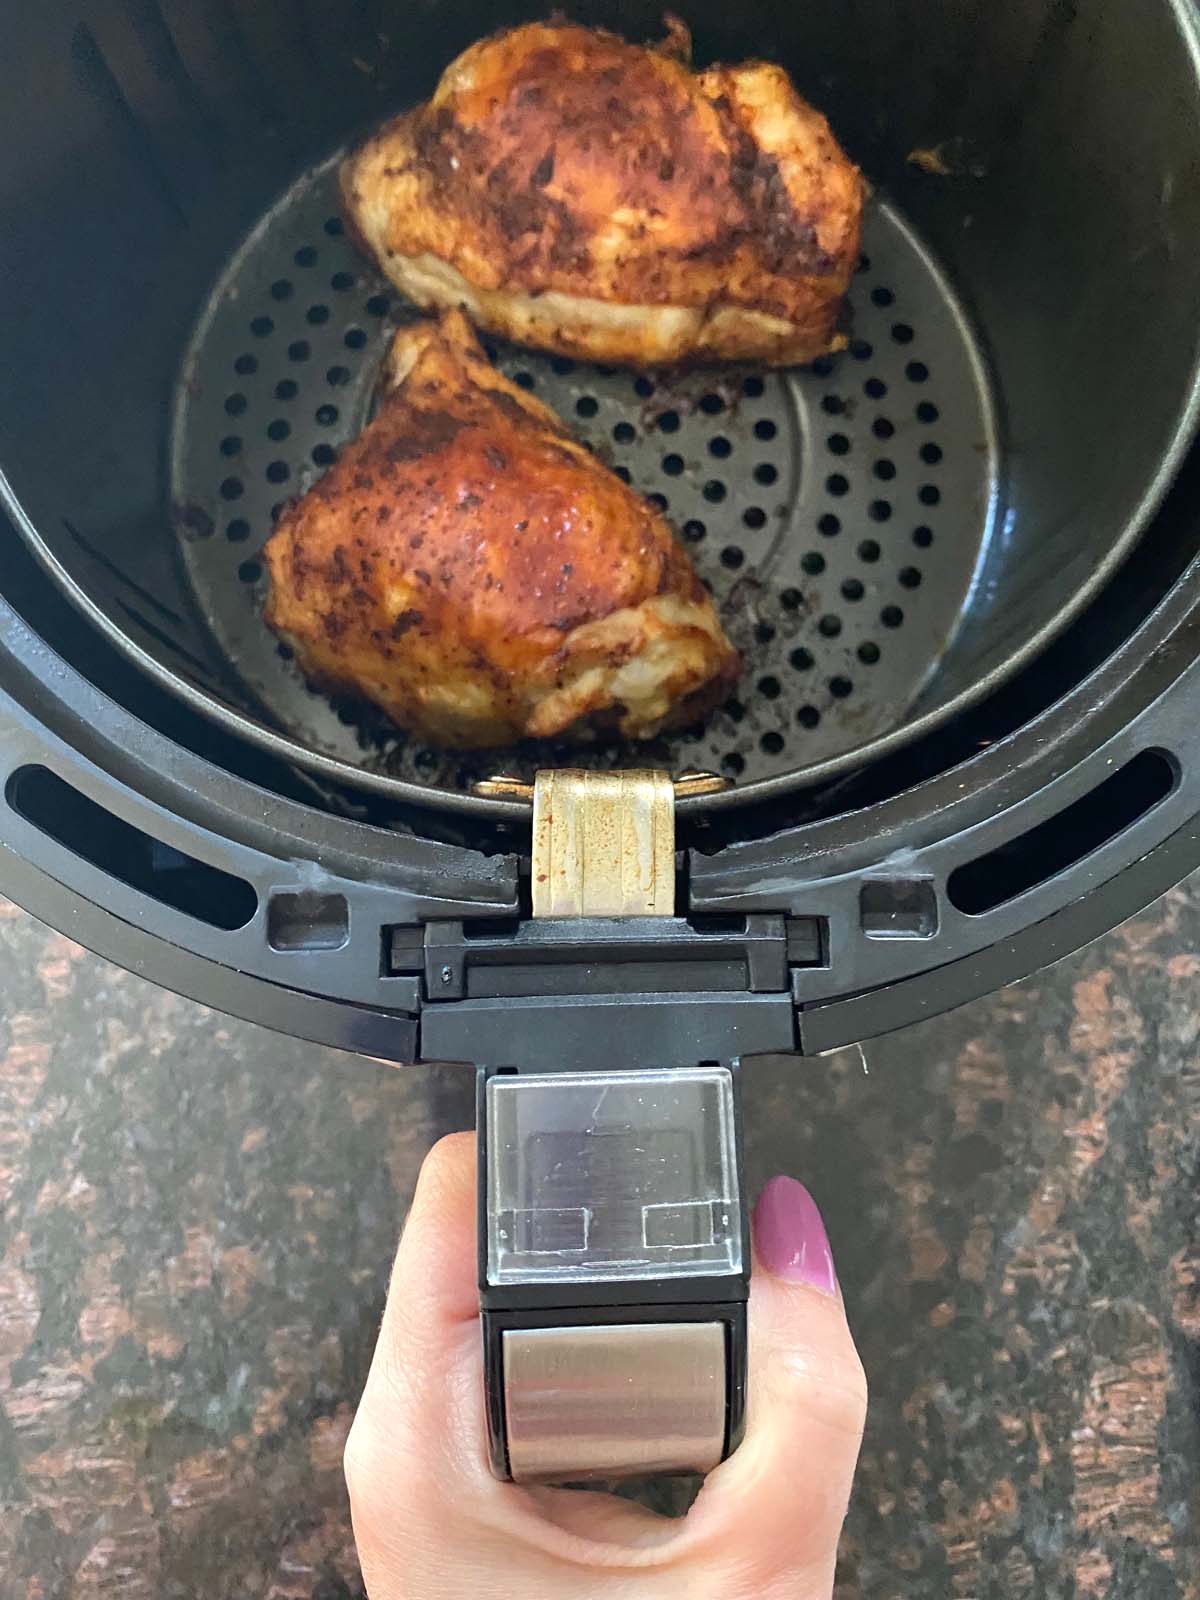 Cooked chicken thighs in an air fryer.